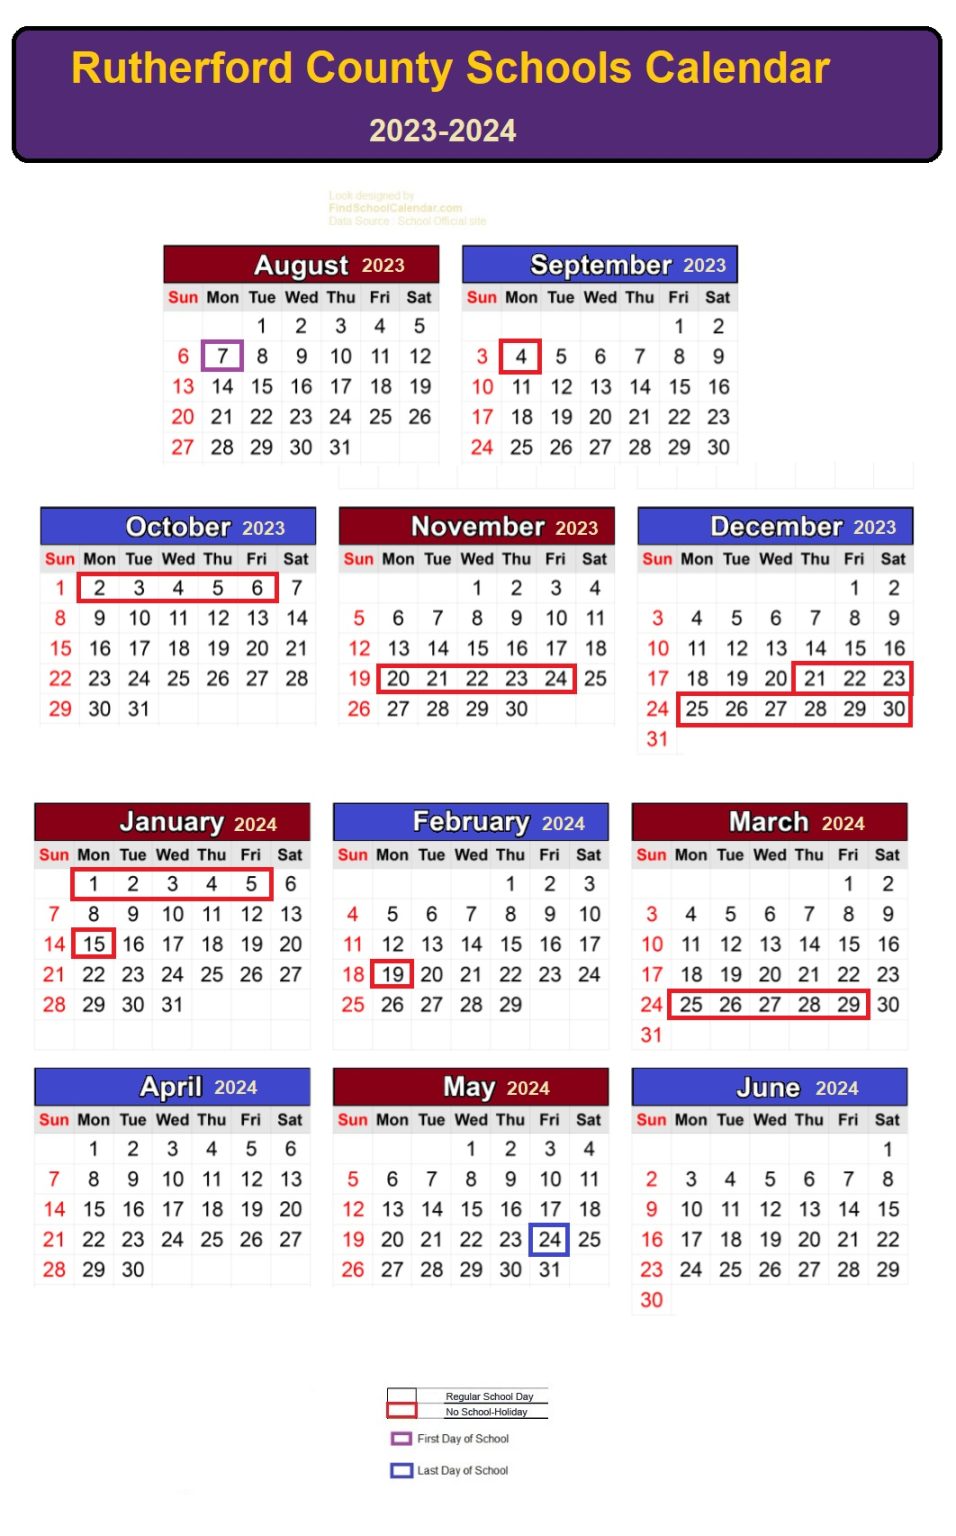 rutherford-county-schools-calendar-2023-24-list-of-holidays